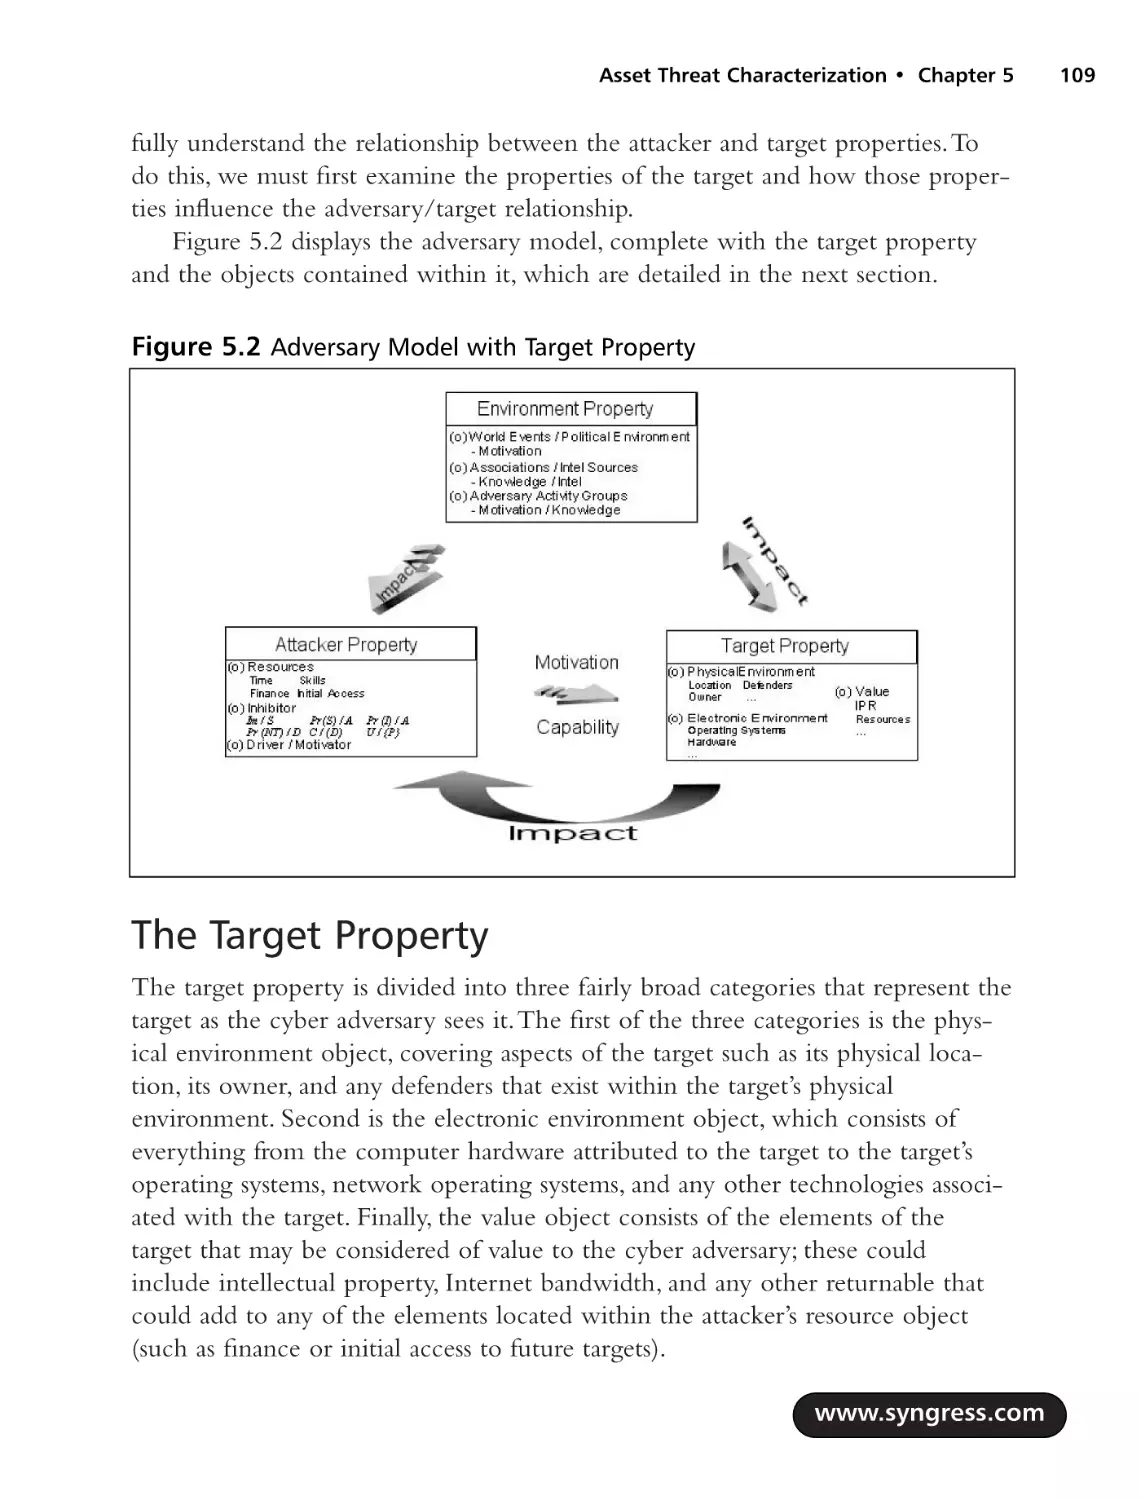 The Target Property